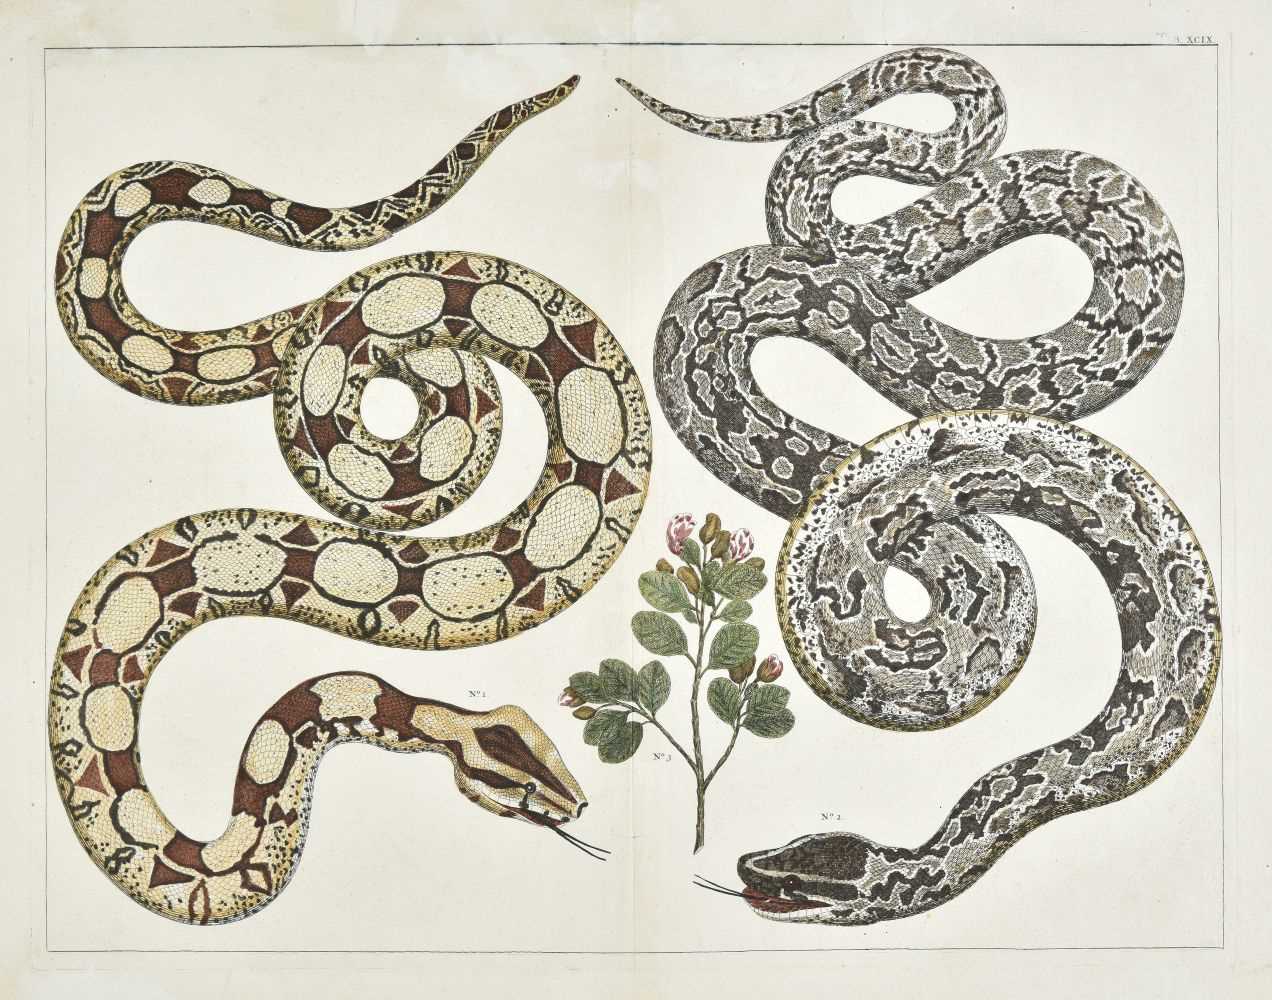 Lot 338 - Reptiles and Amphibians. A mixed collection of approximately 130 prints, 18th & 19th century